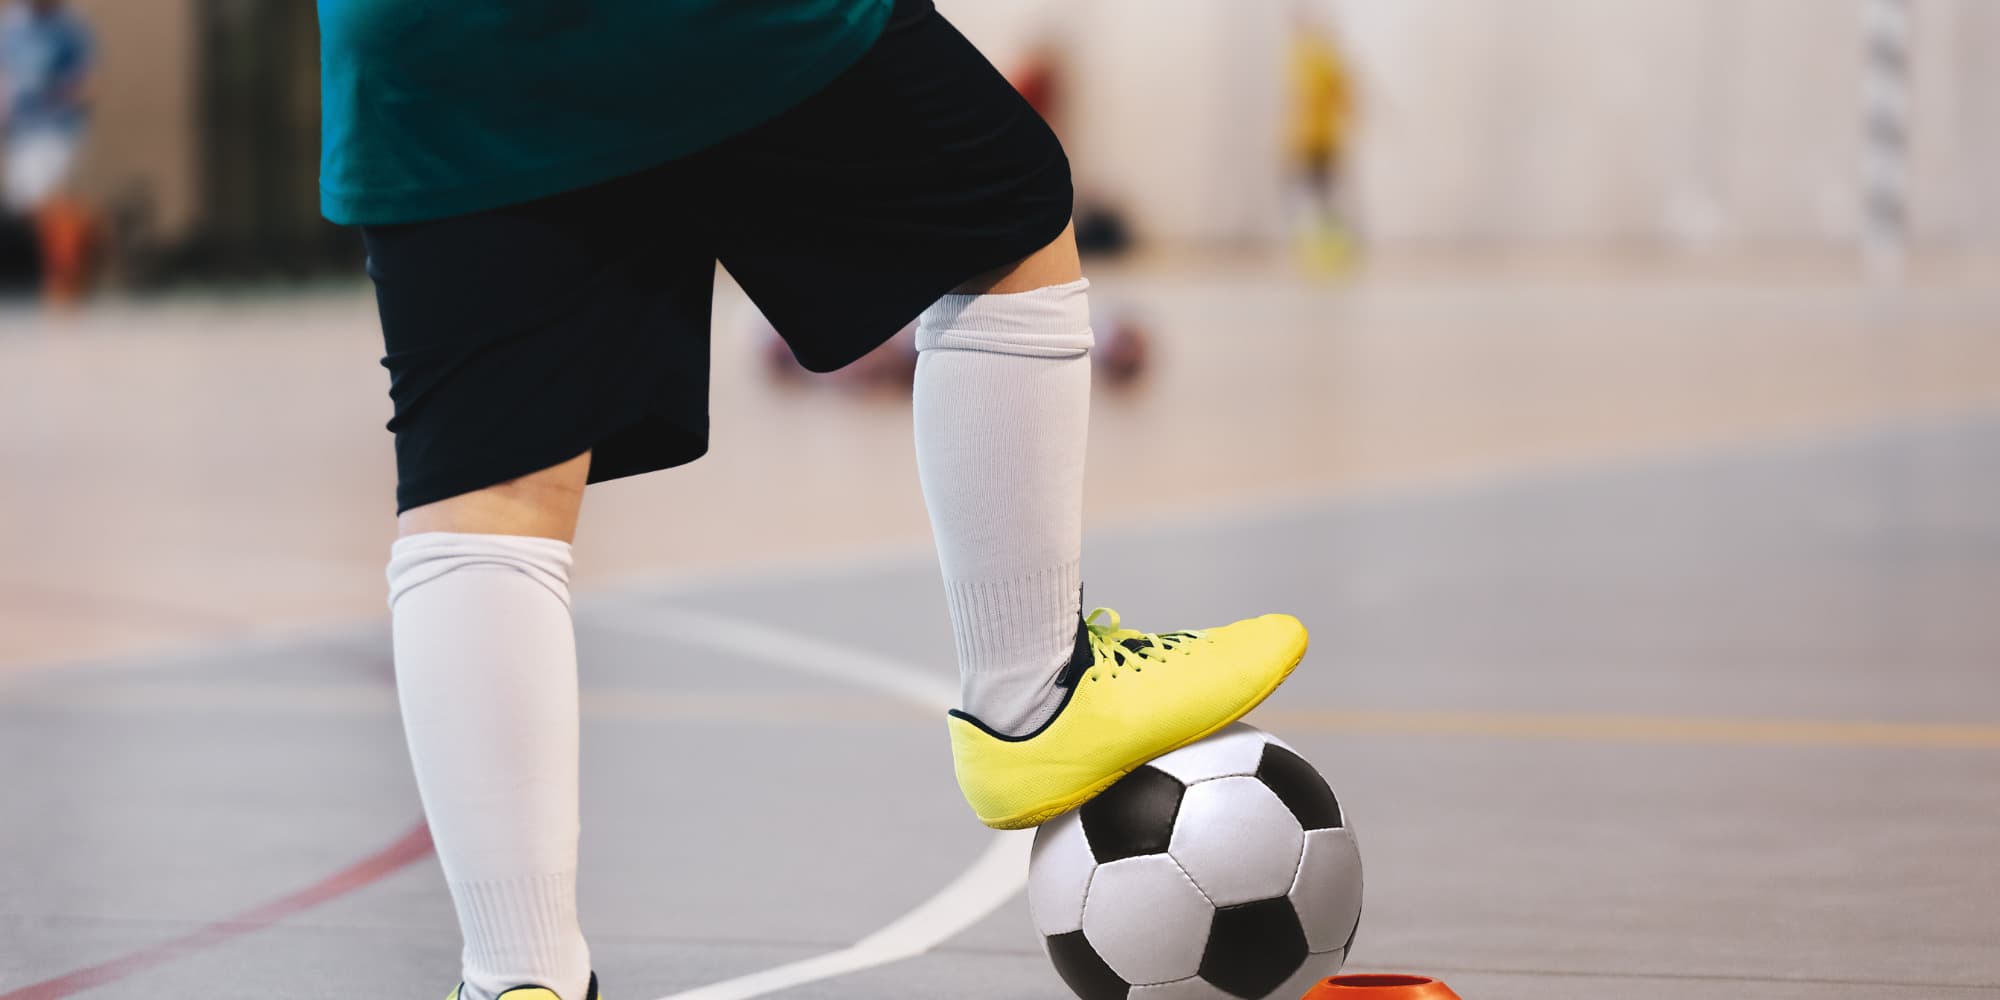 A pair of legs with one foot on a soccer ball on an indoor court